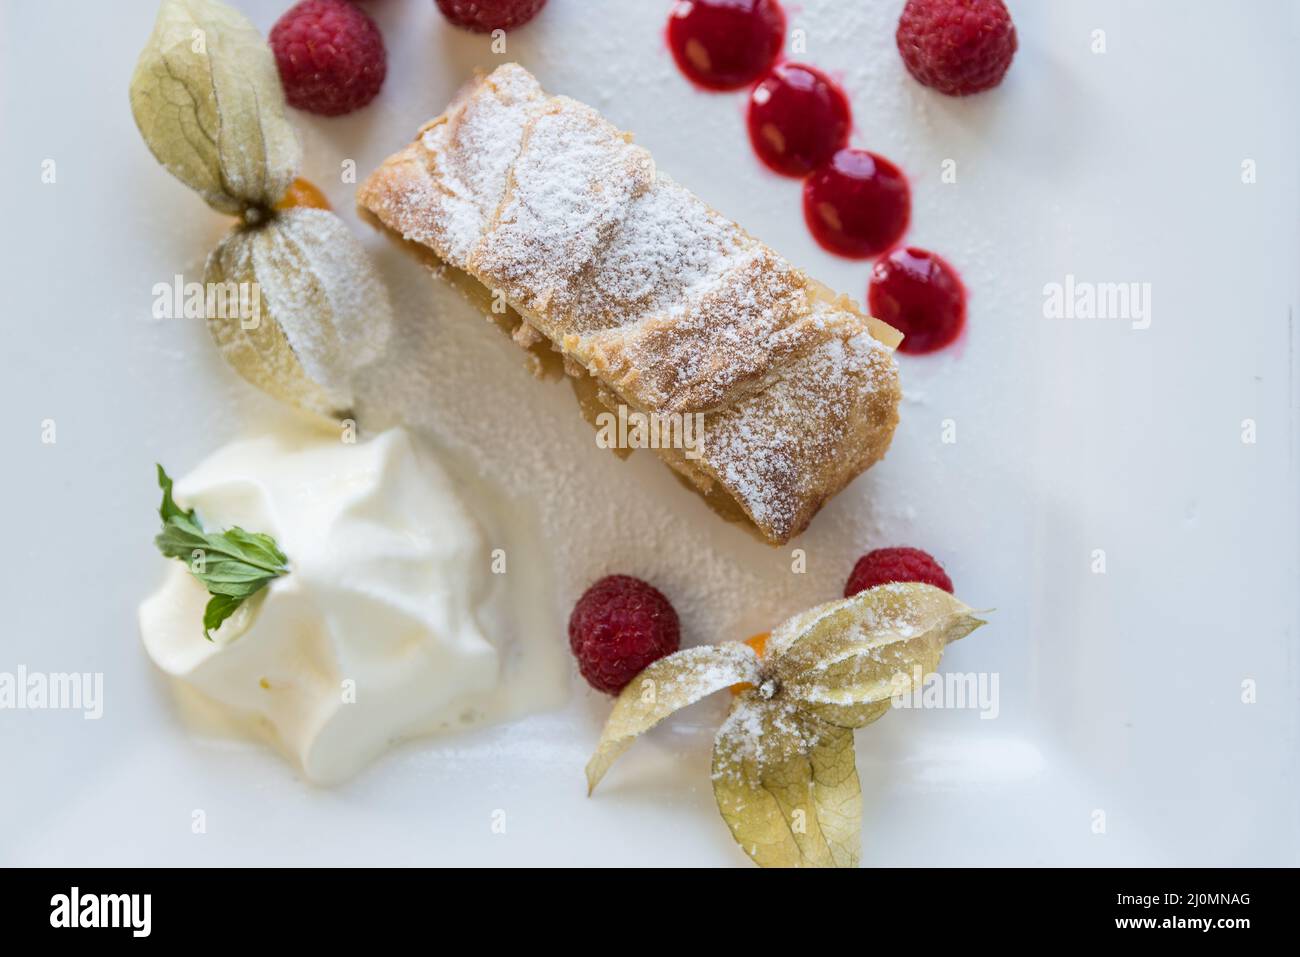 Apple strudel - delicious fruit cake with fruits and whipped cream Stock Photo